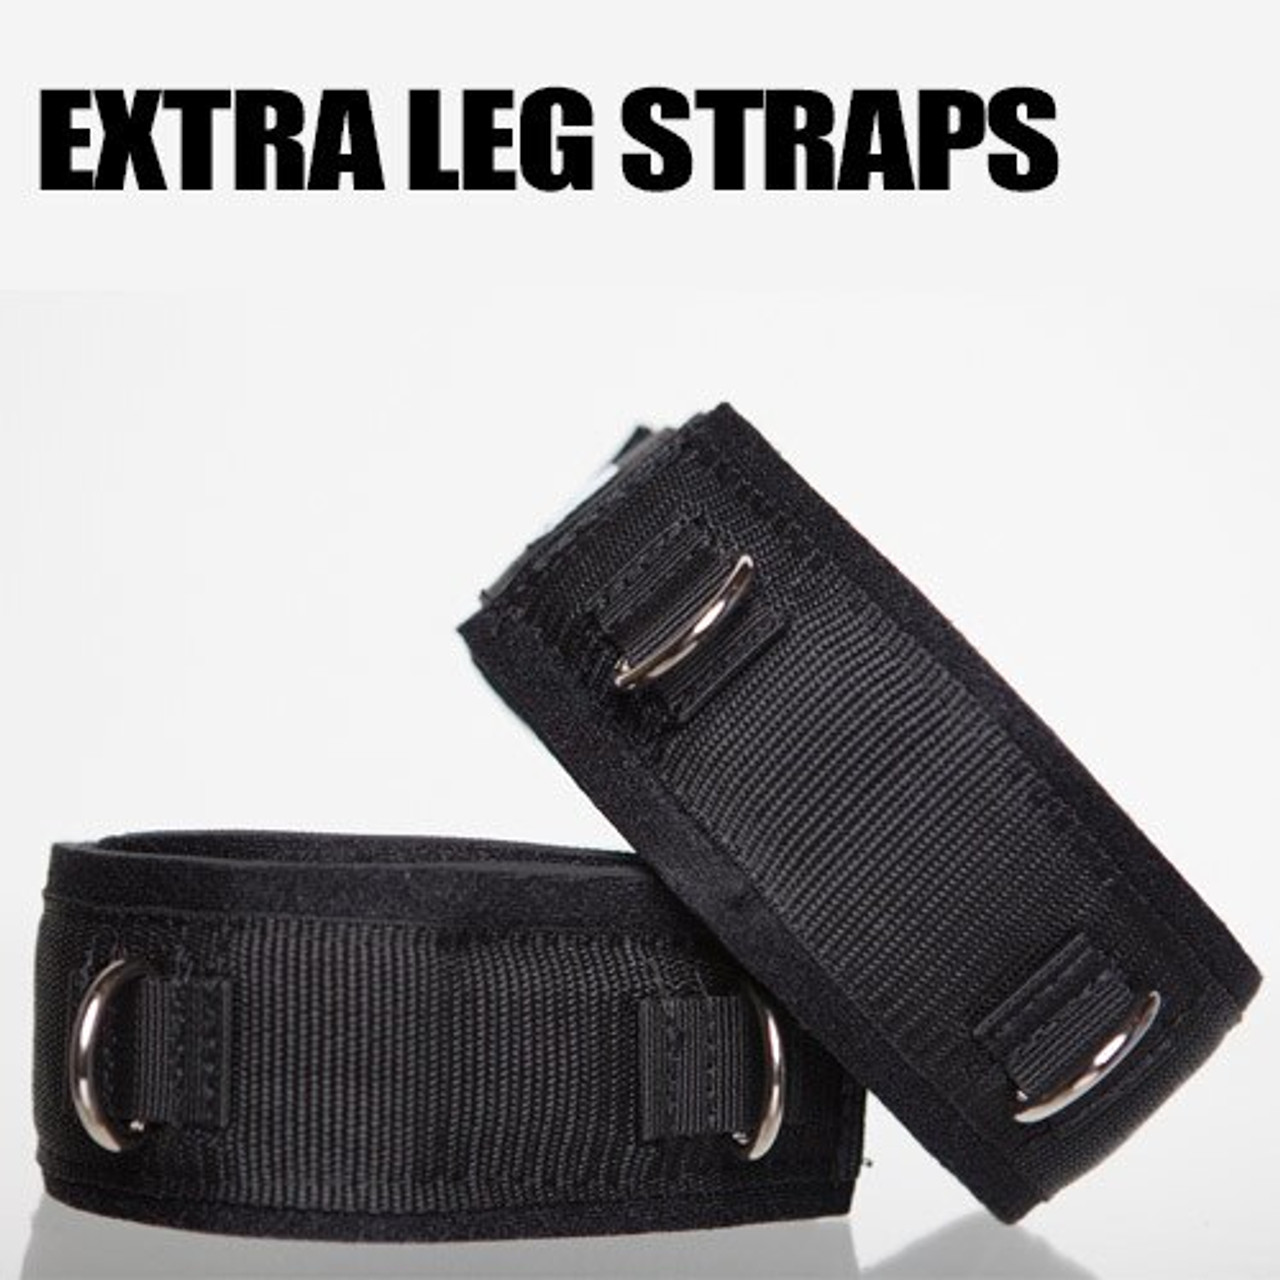 Leg Strap Compatibility Update: Do You Need the Leg Strap?